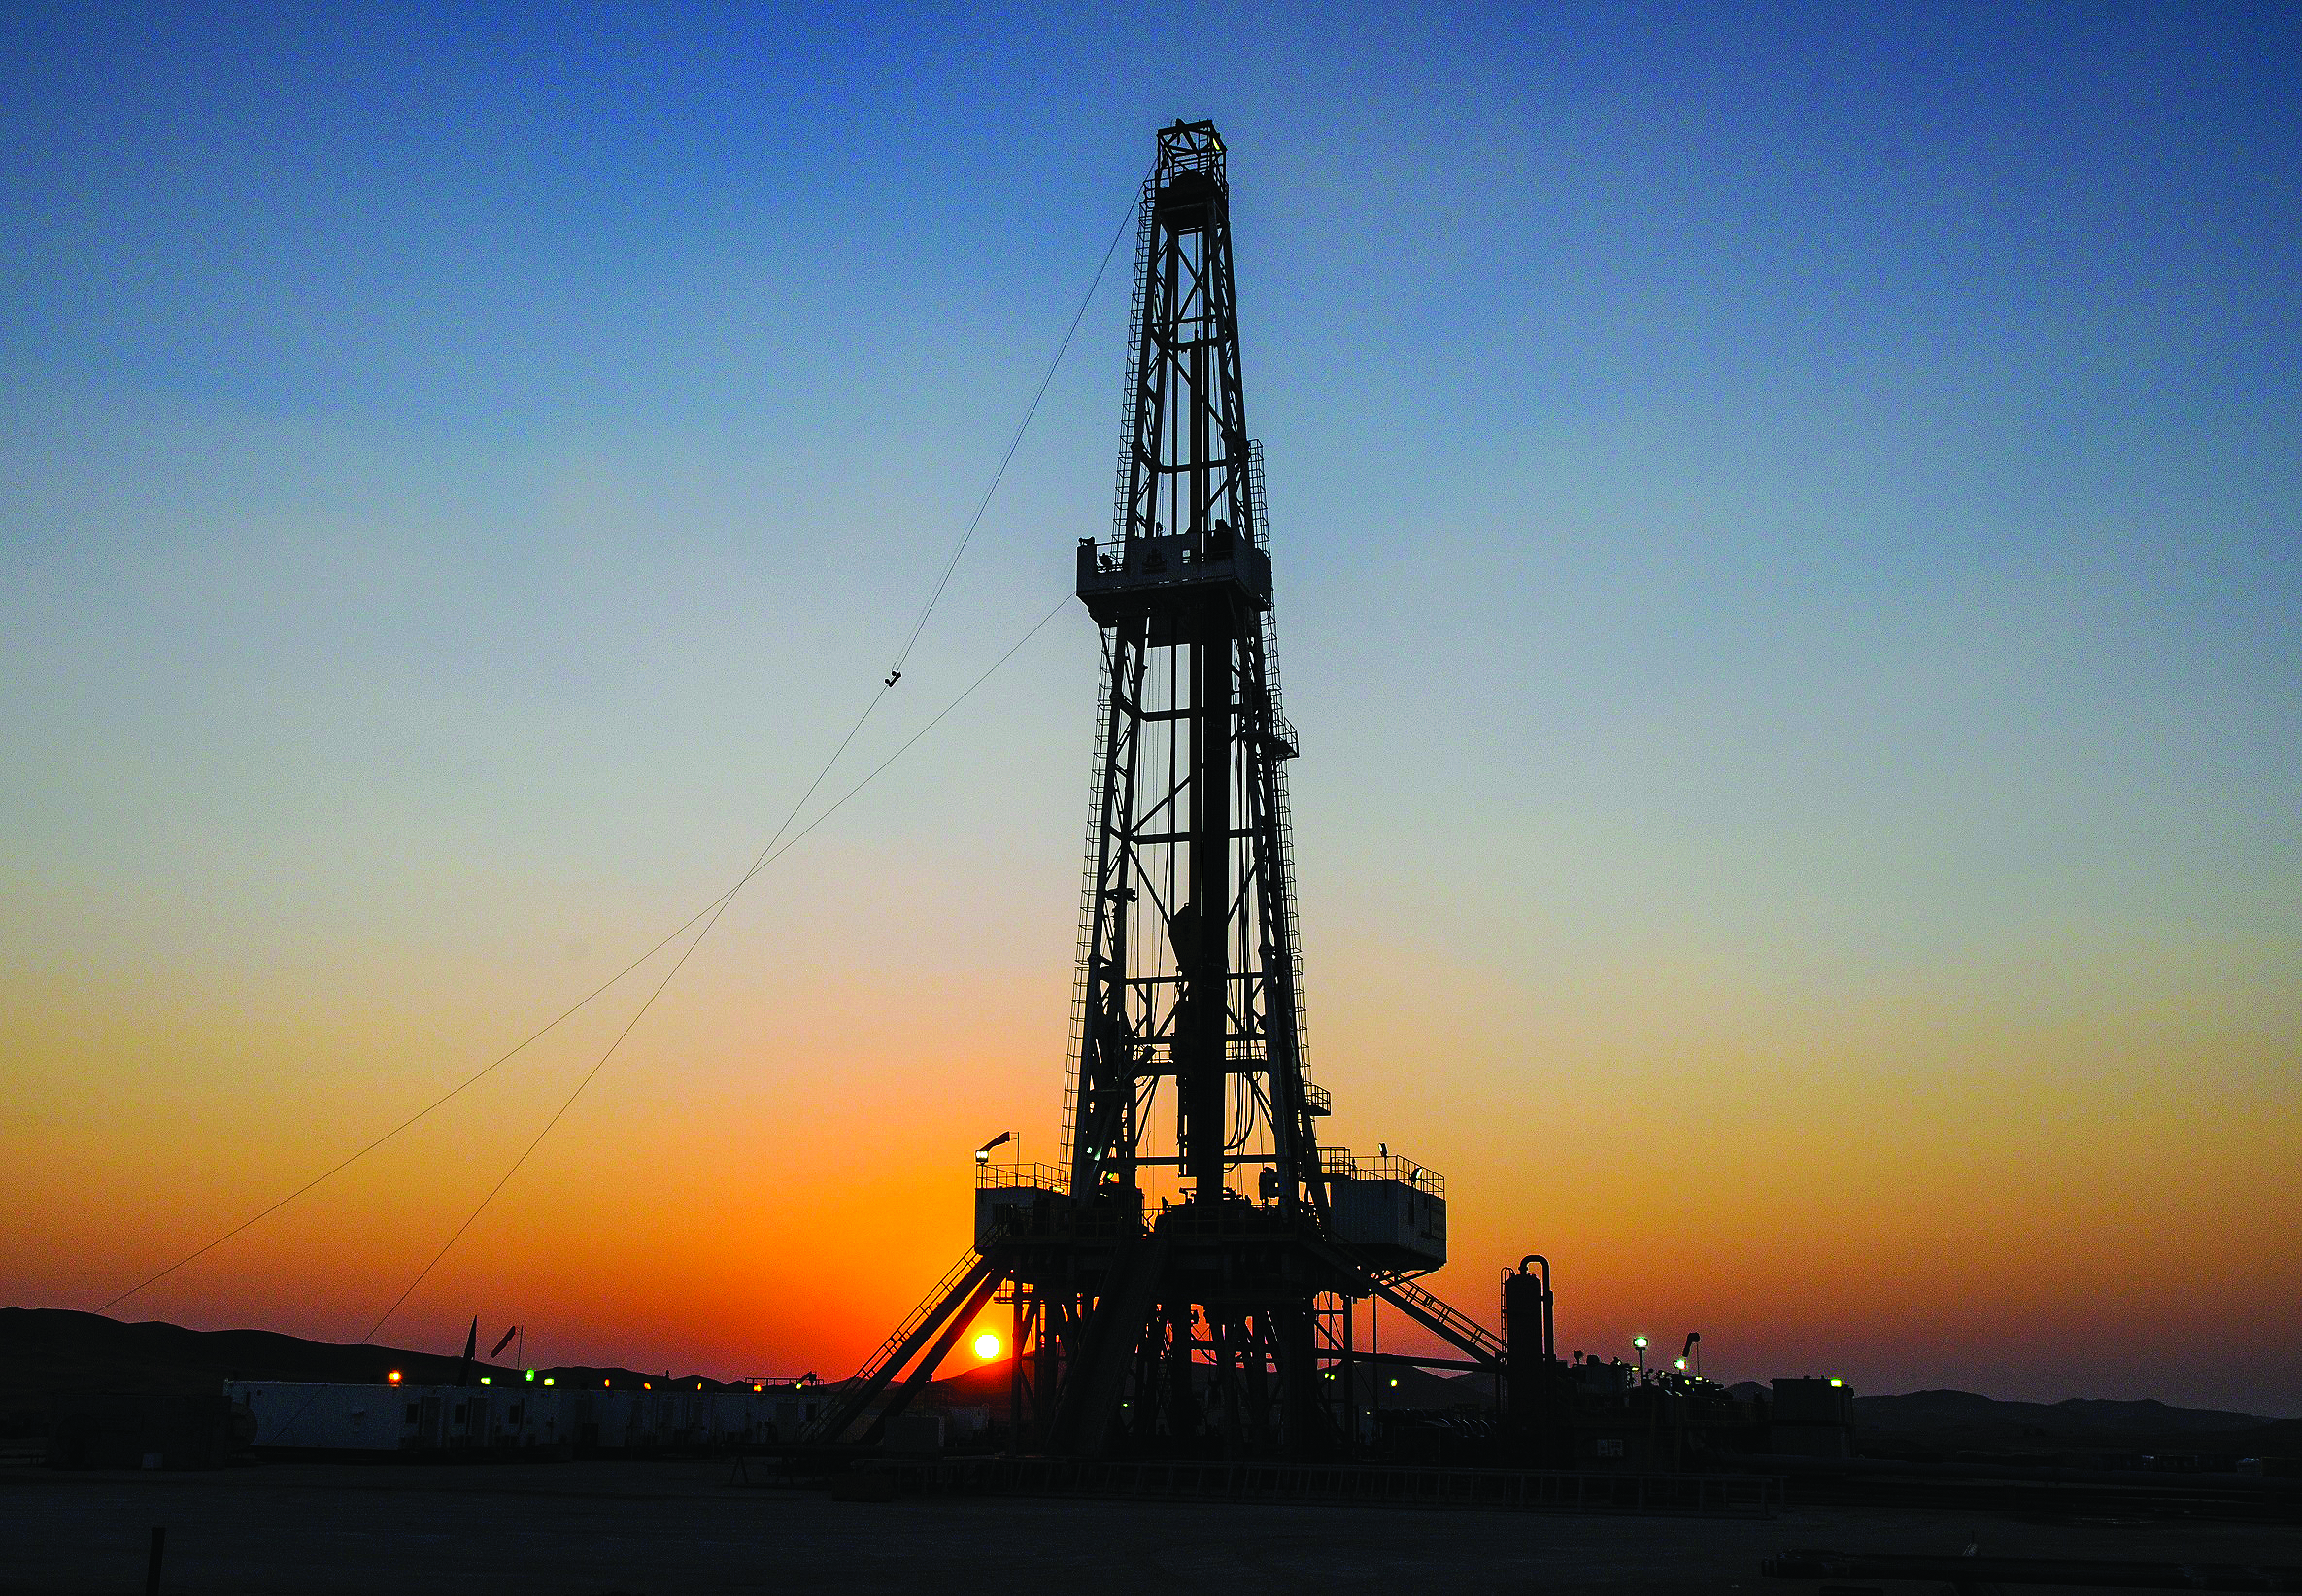 OOCEP named fastest-growing oil and gas firm in Middle East